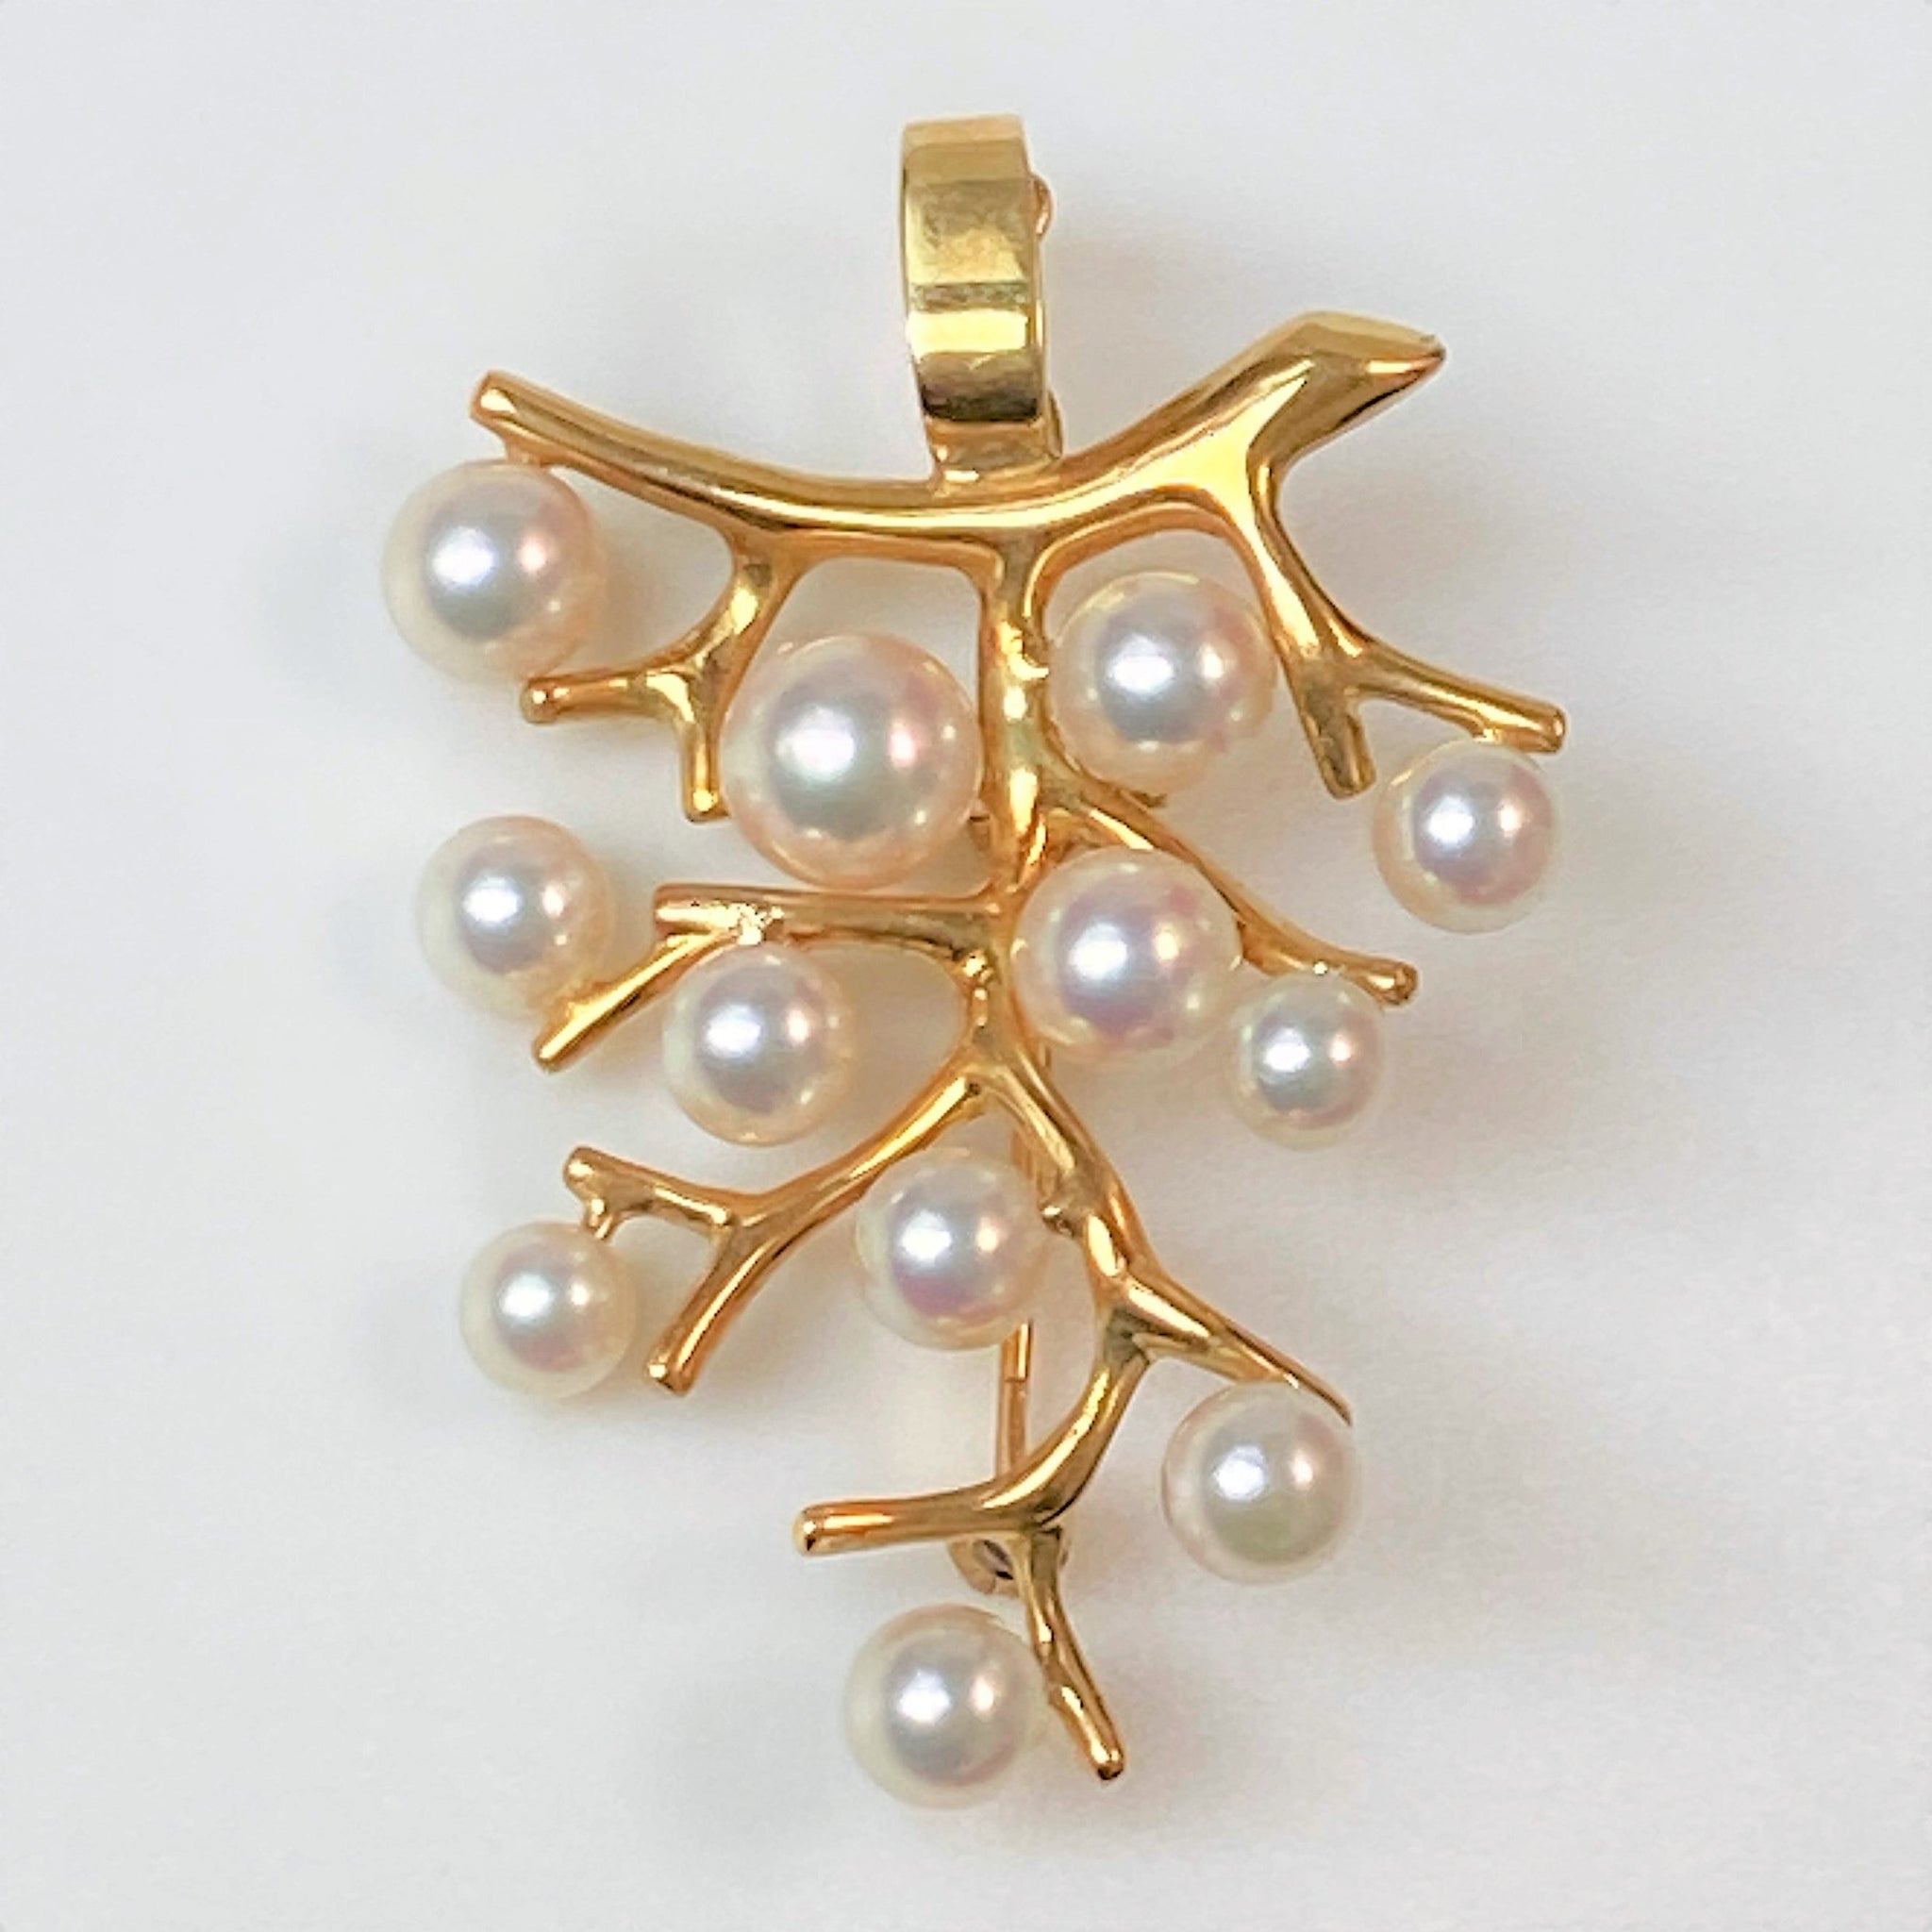 18ct Gold and Pearl Enhancer Pendant / Brooch